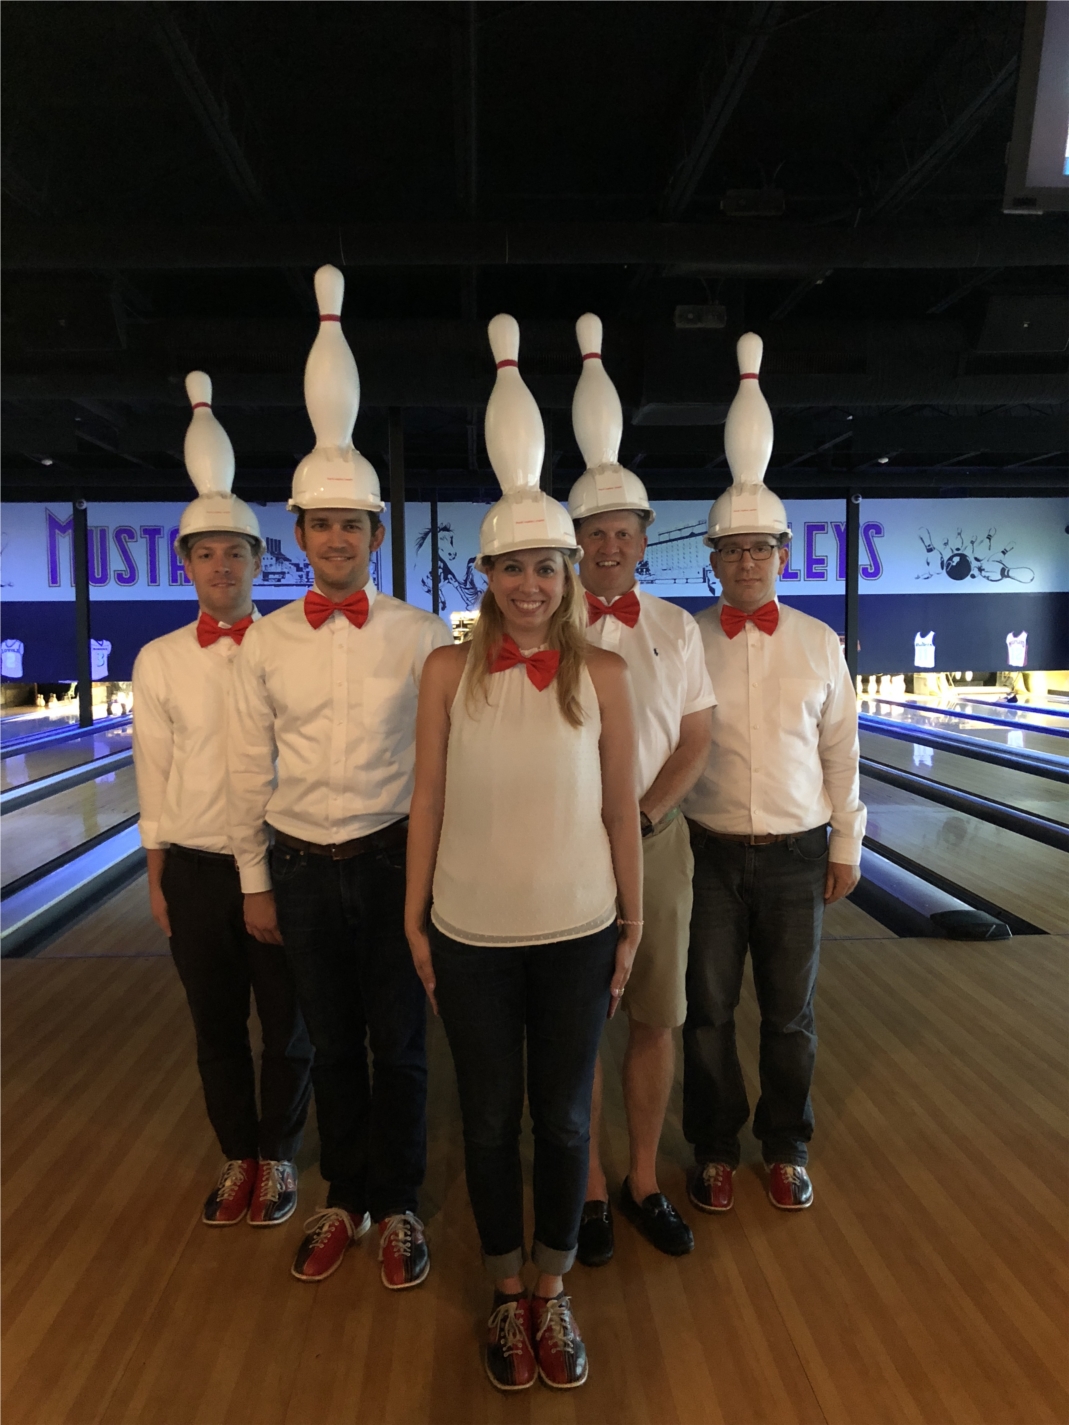 One of the most anticipated events of the year at Hord Coplan Macht is our annual costume bowling tournament.